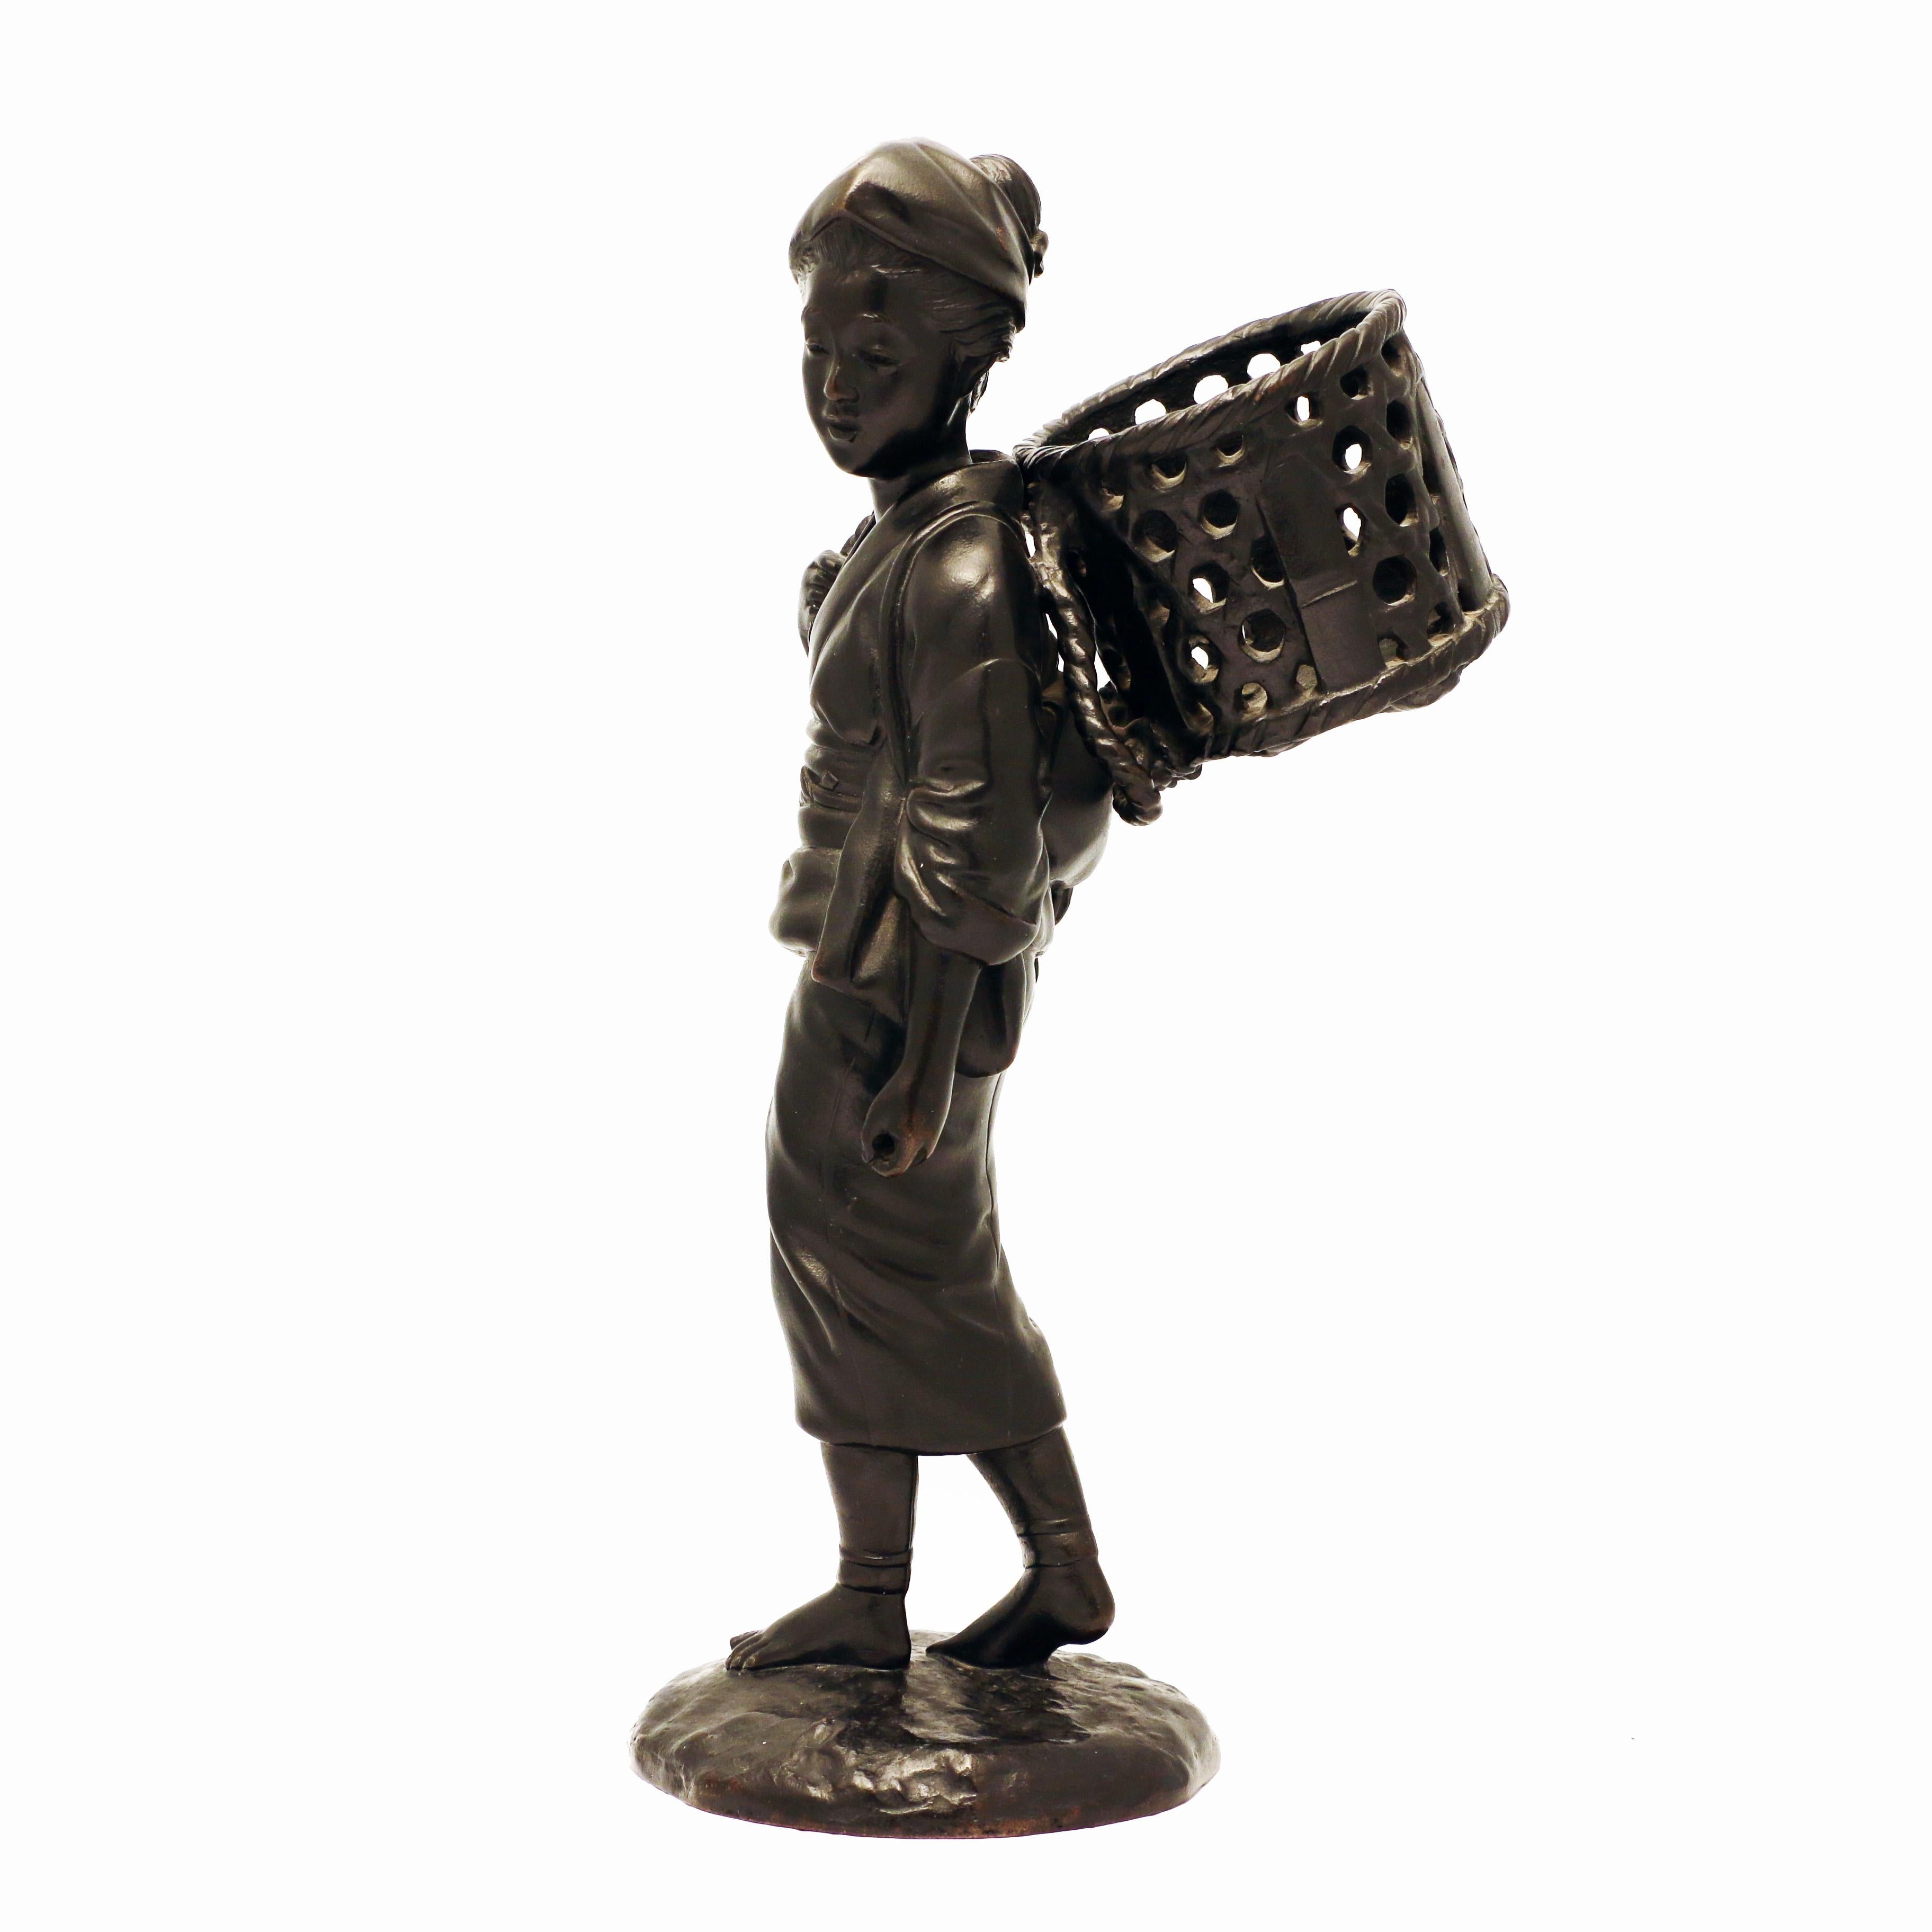 Sympathetically modelled, she looks to her left while turning, her right hand holds the cord supporting the basket. She is shown in mid-stride. The sculptor has caught well the sense of motion. It is signed on the base.